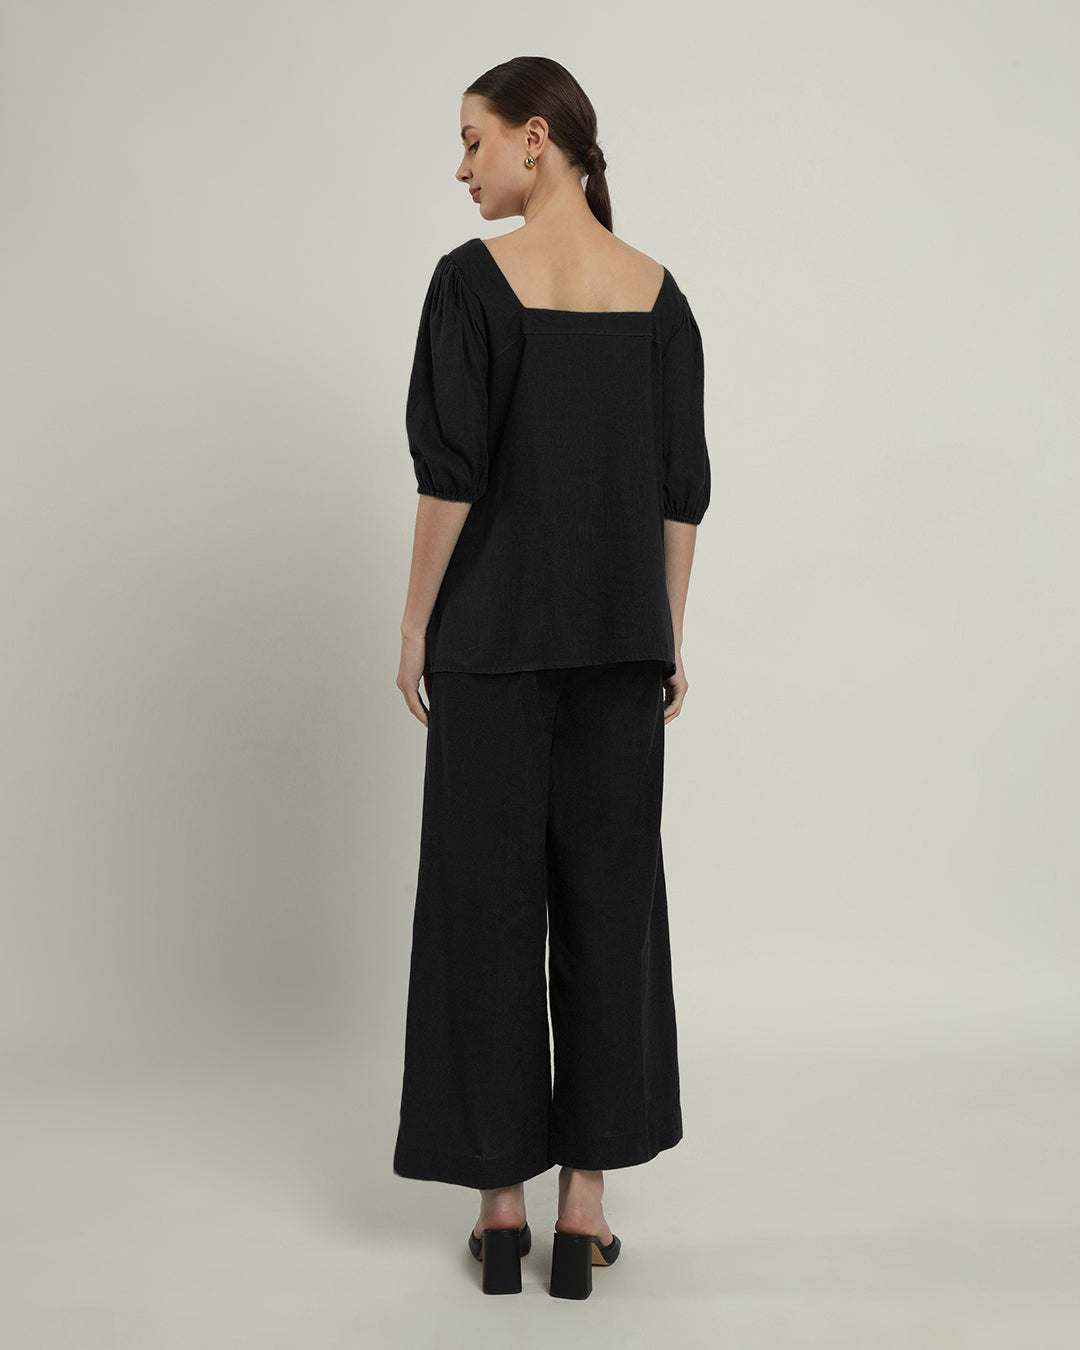 Noir Urbanite Square Neck Top (Without Bottoms)